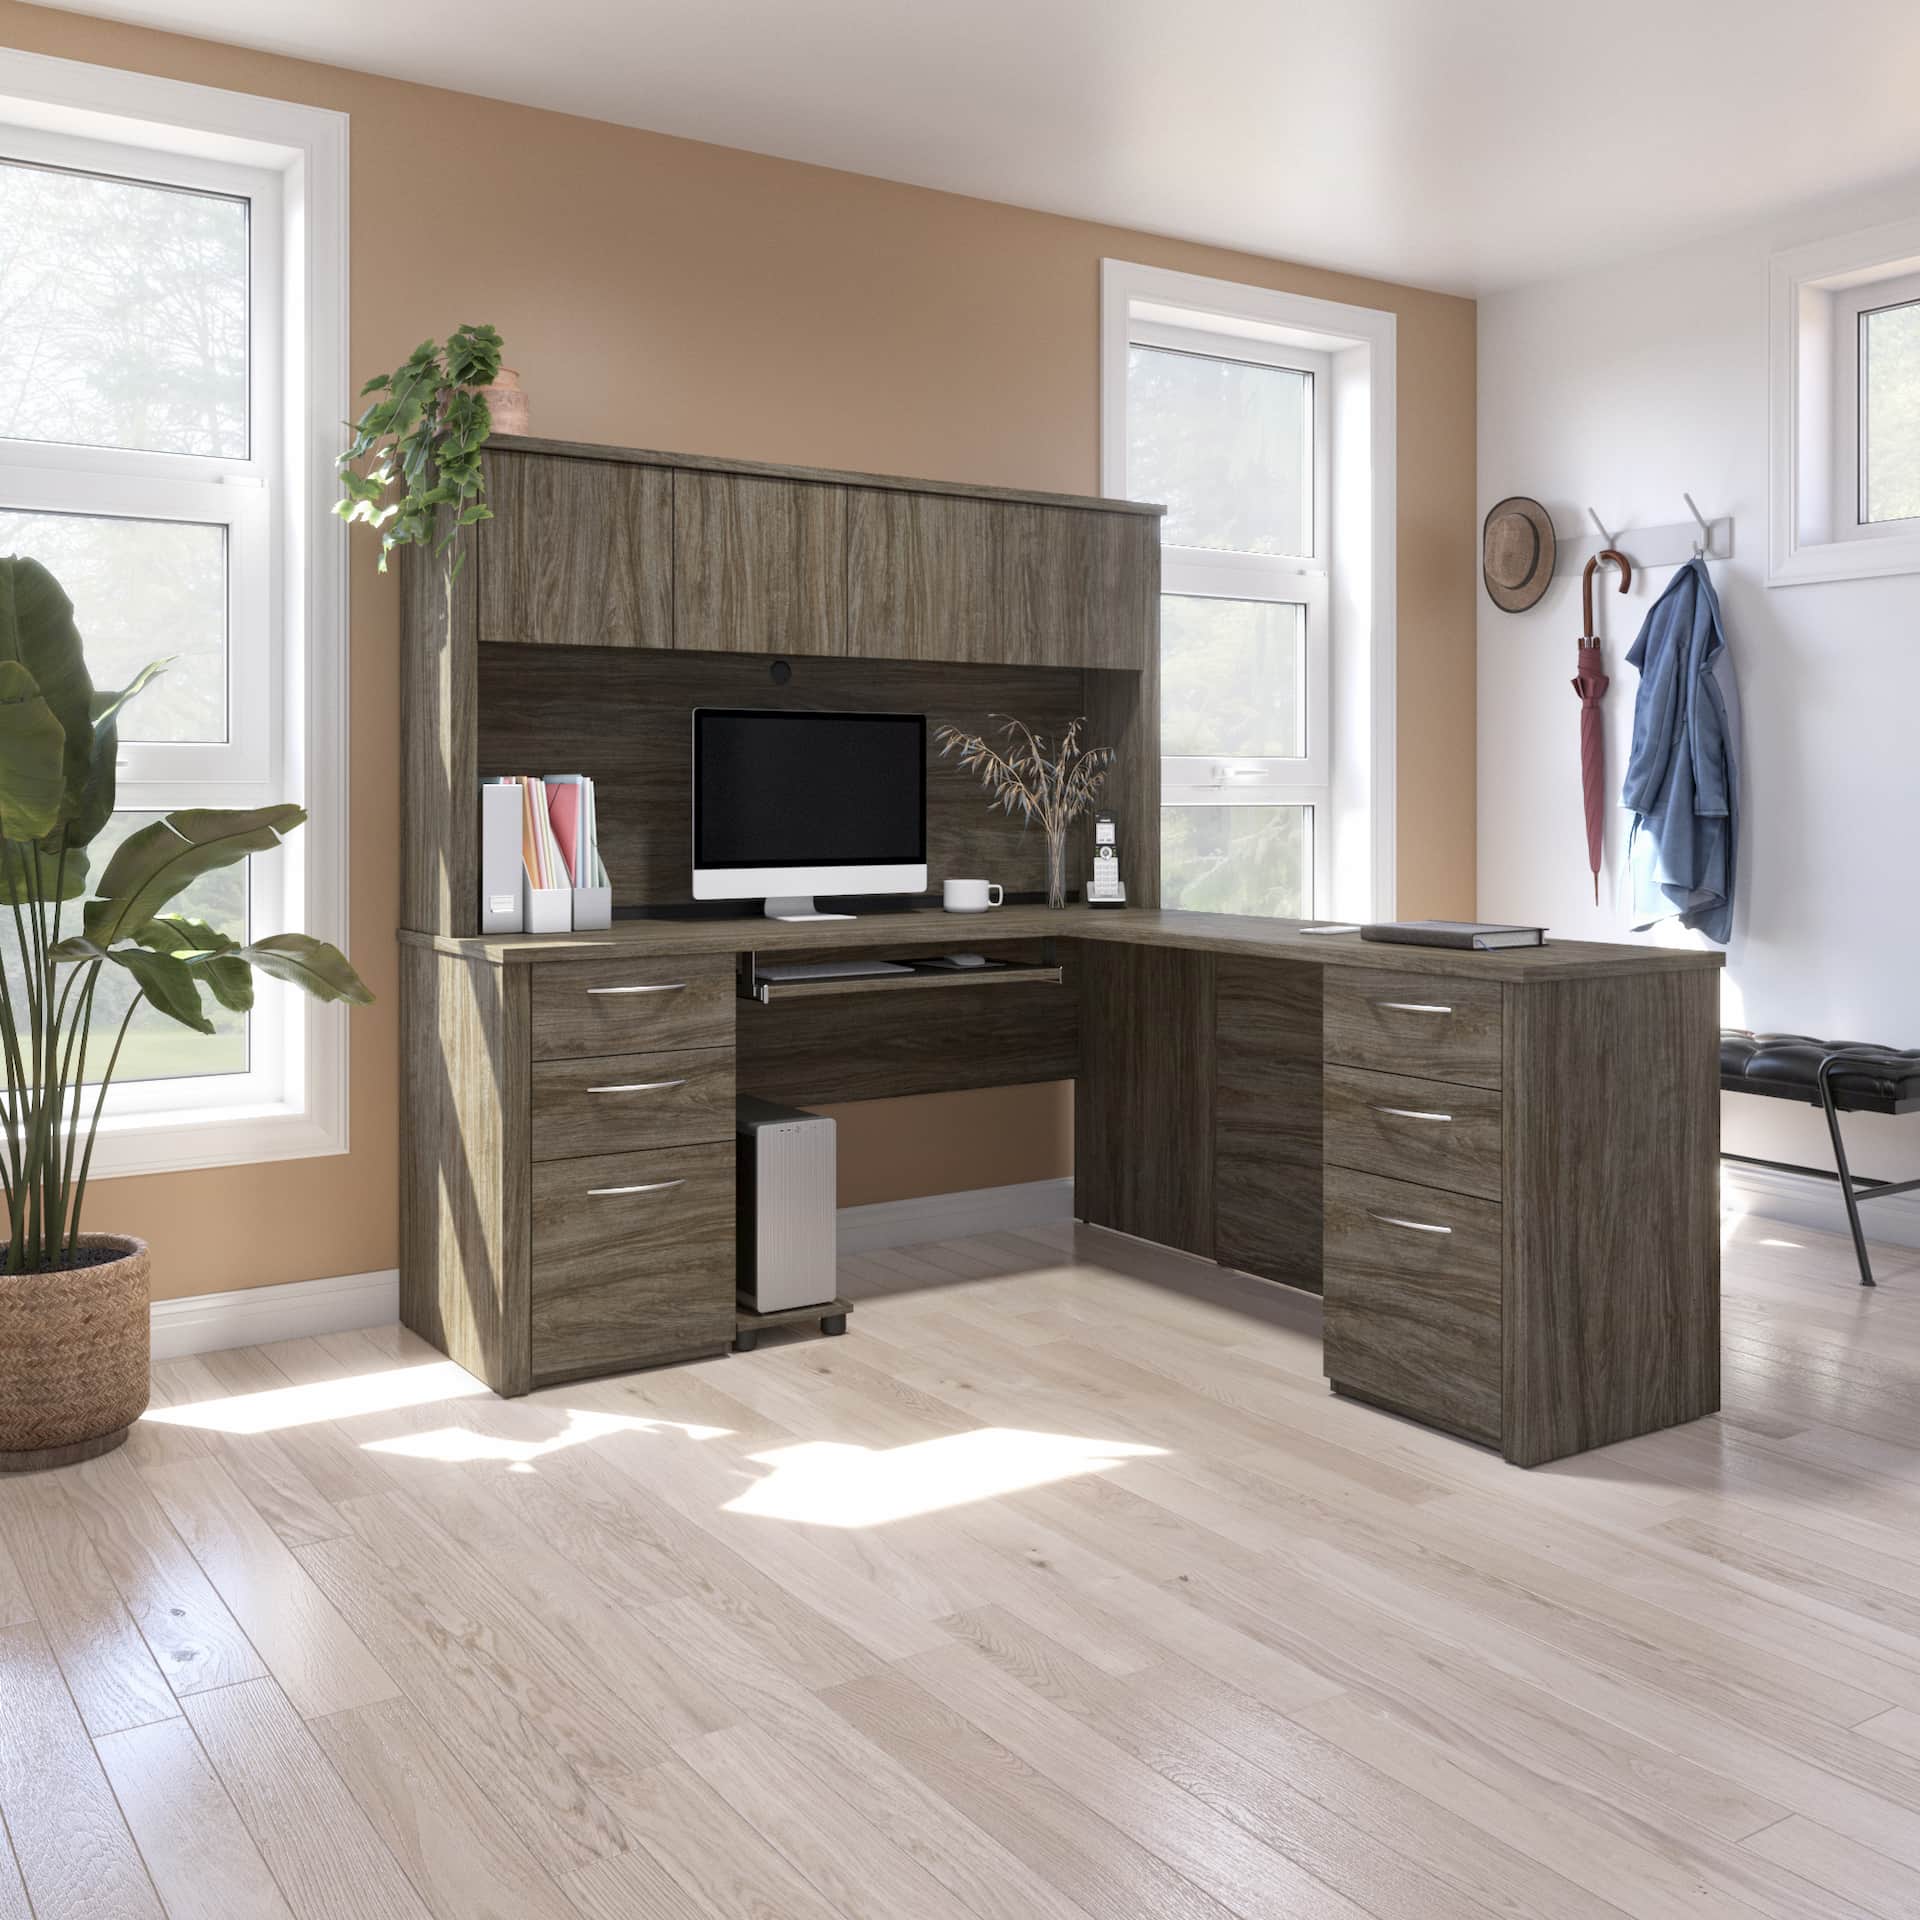 Looking for Office Desks in Canada? We’ve Got You Covered!